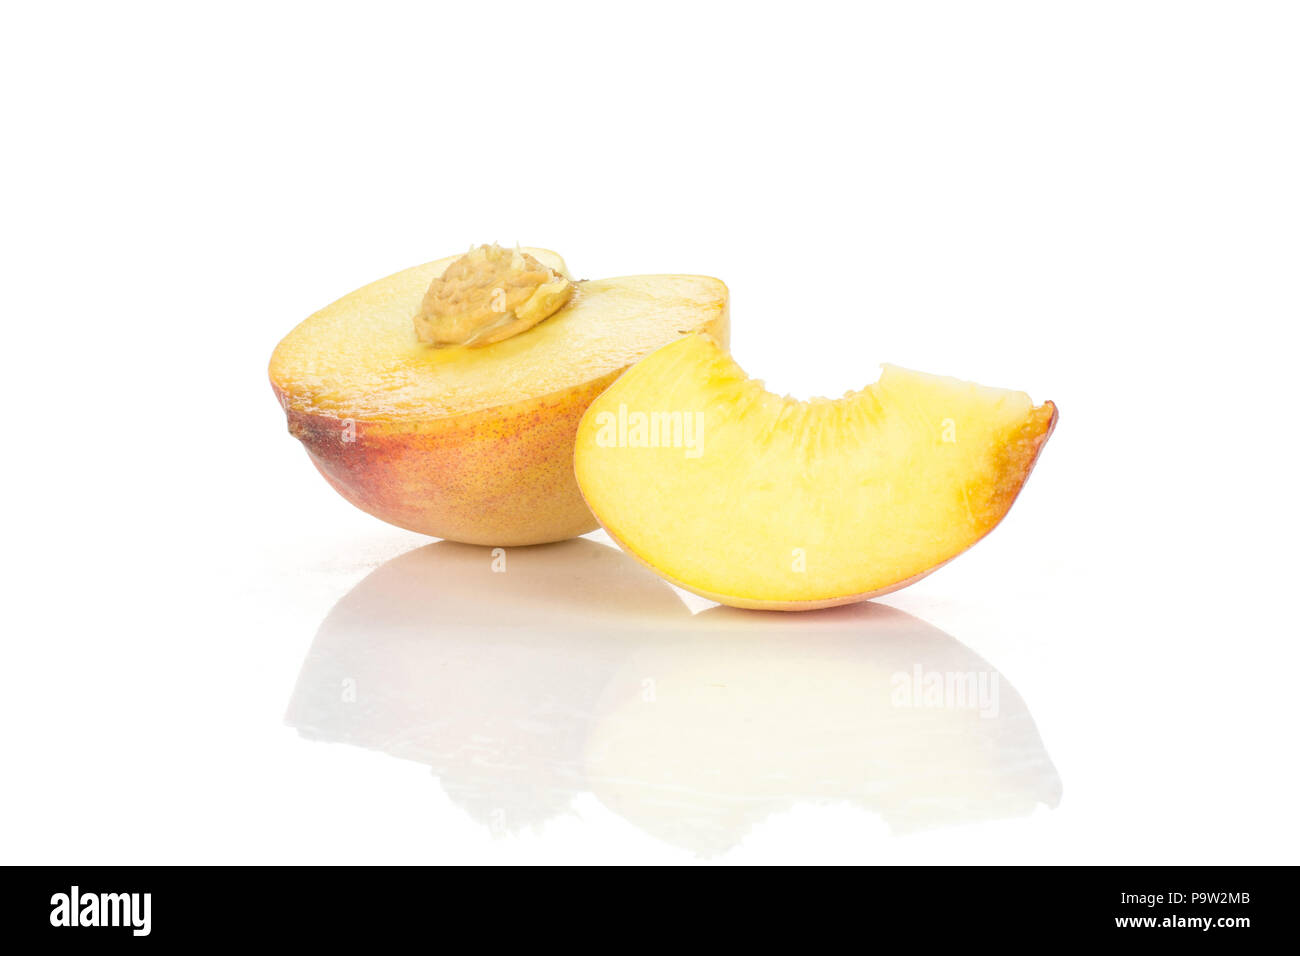 One yellow peach half with a slice and drupe inside isolated on white background Stock Photo